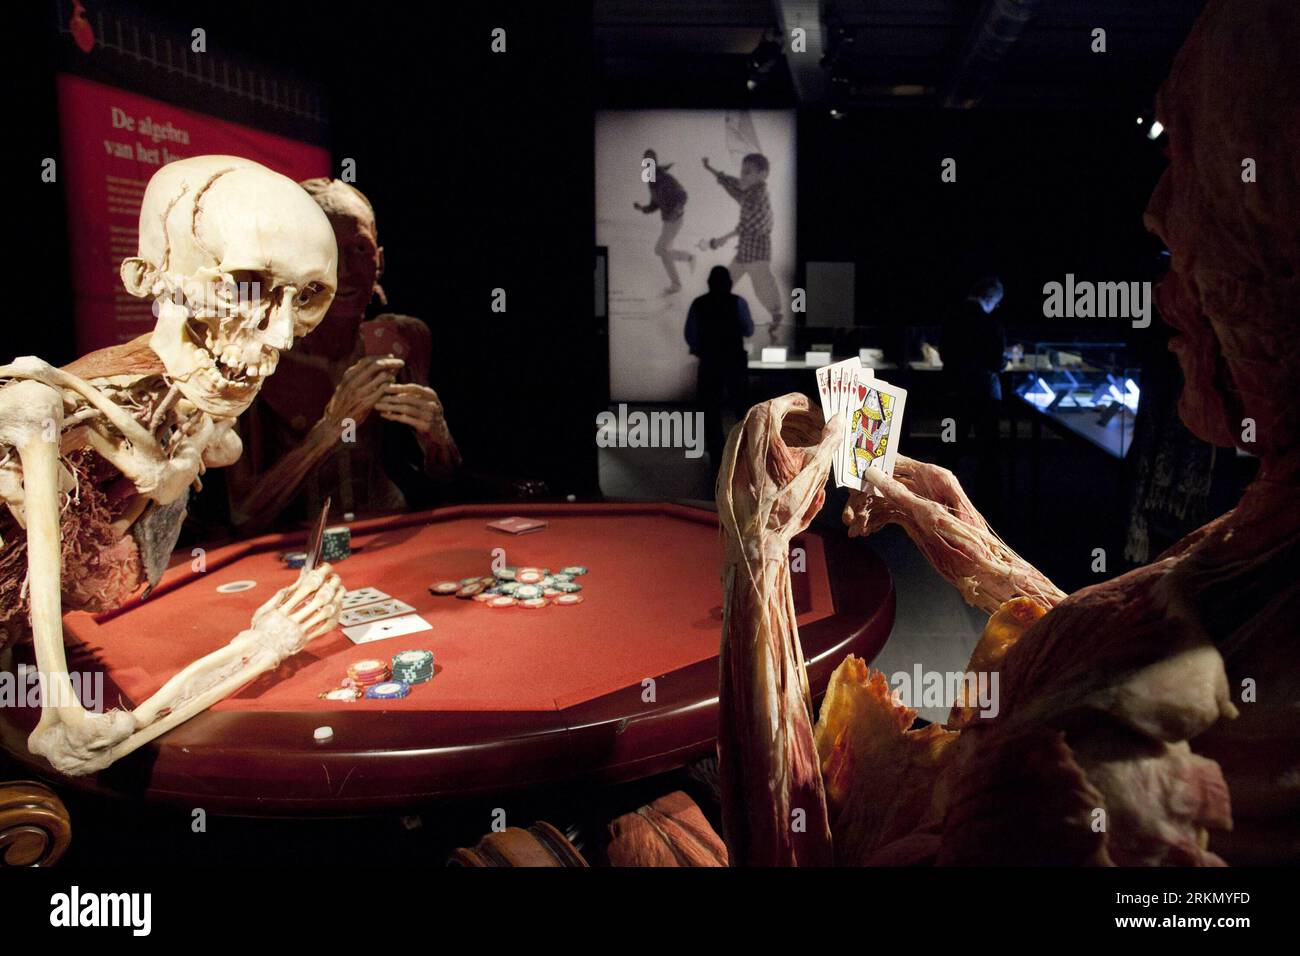 Bildnummer: 56874530  Datum: 12.01.2012  Copyright: imago/Xinhua (120112)-- AMSTERDAM, Jan. 12, 2012 (Xinhua) -- Visitors watch the bodies at the Body Worlds exhibition in Amsterdam, the Netherlands, on Jan. 12, 2012. The original anatomical exhibition, displaying authentic human bodies of donors, opened here Thuresday. (Xinhua/Rich Nederstigt) NETHERLANDS-AMSTERDAM-BODY SPECIMEN-EXHIBITON PUBLICATIONxNOTxINxCHN Kultur Ausstellung Plastination Körperwelten premiumd xns x0x 2012 quer      56874530 Date 12 01 2012 Copyright Imago XINHUA  Amsterdam Jan 12 2012 XINHUA Visitors Watch The Bodies AT Stock Photo